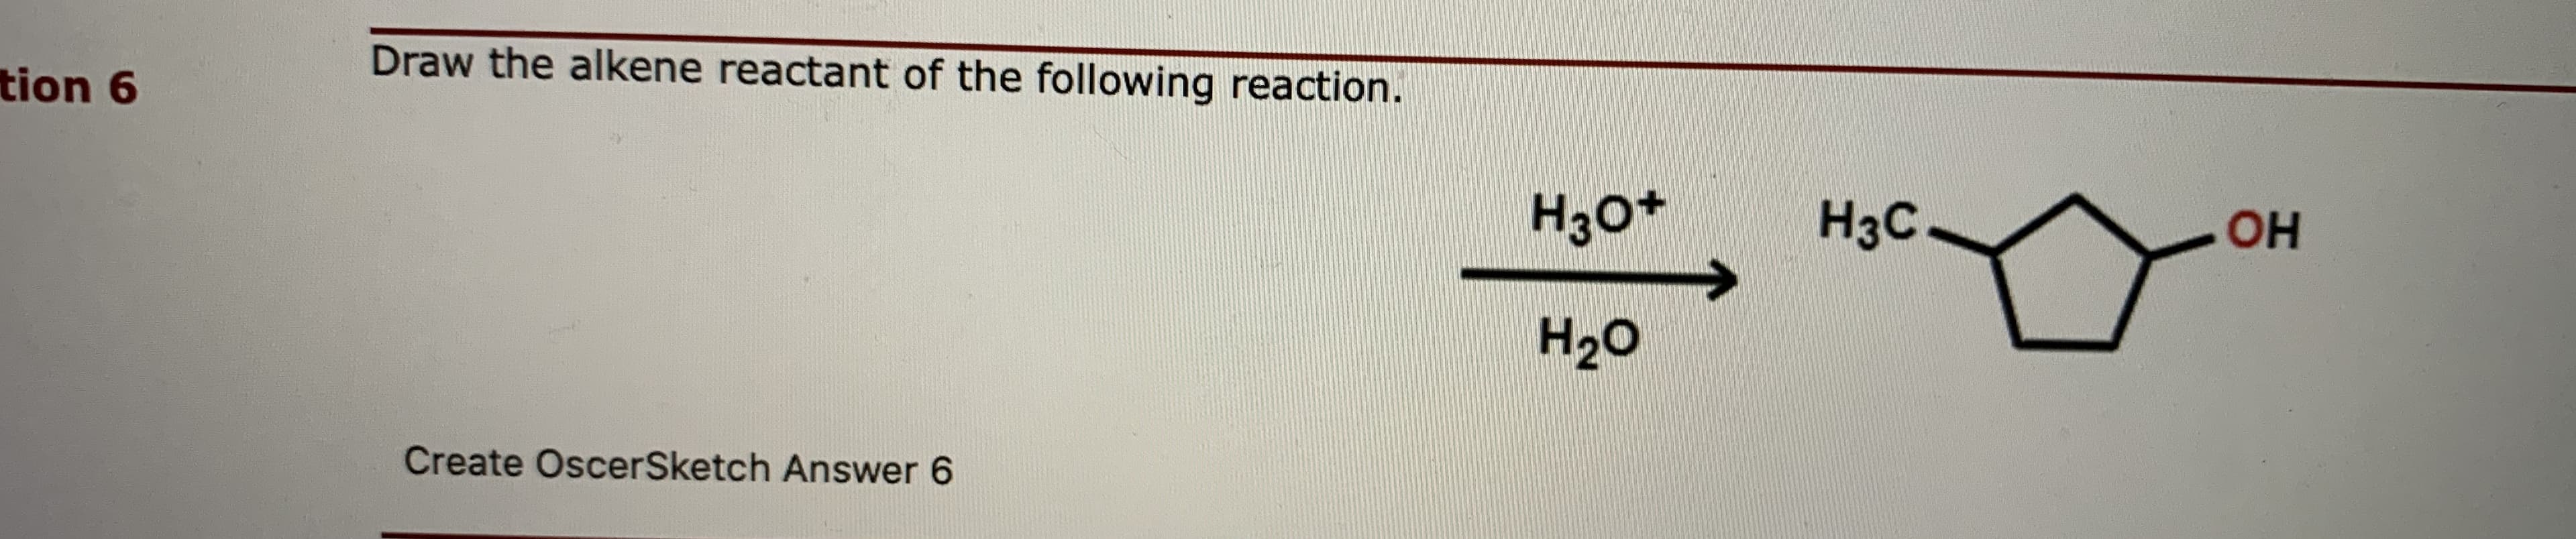 Draw the alkene reactant of the following reaction.
n 6
H3o+
H3C
OH
H20
